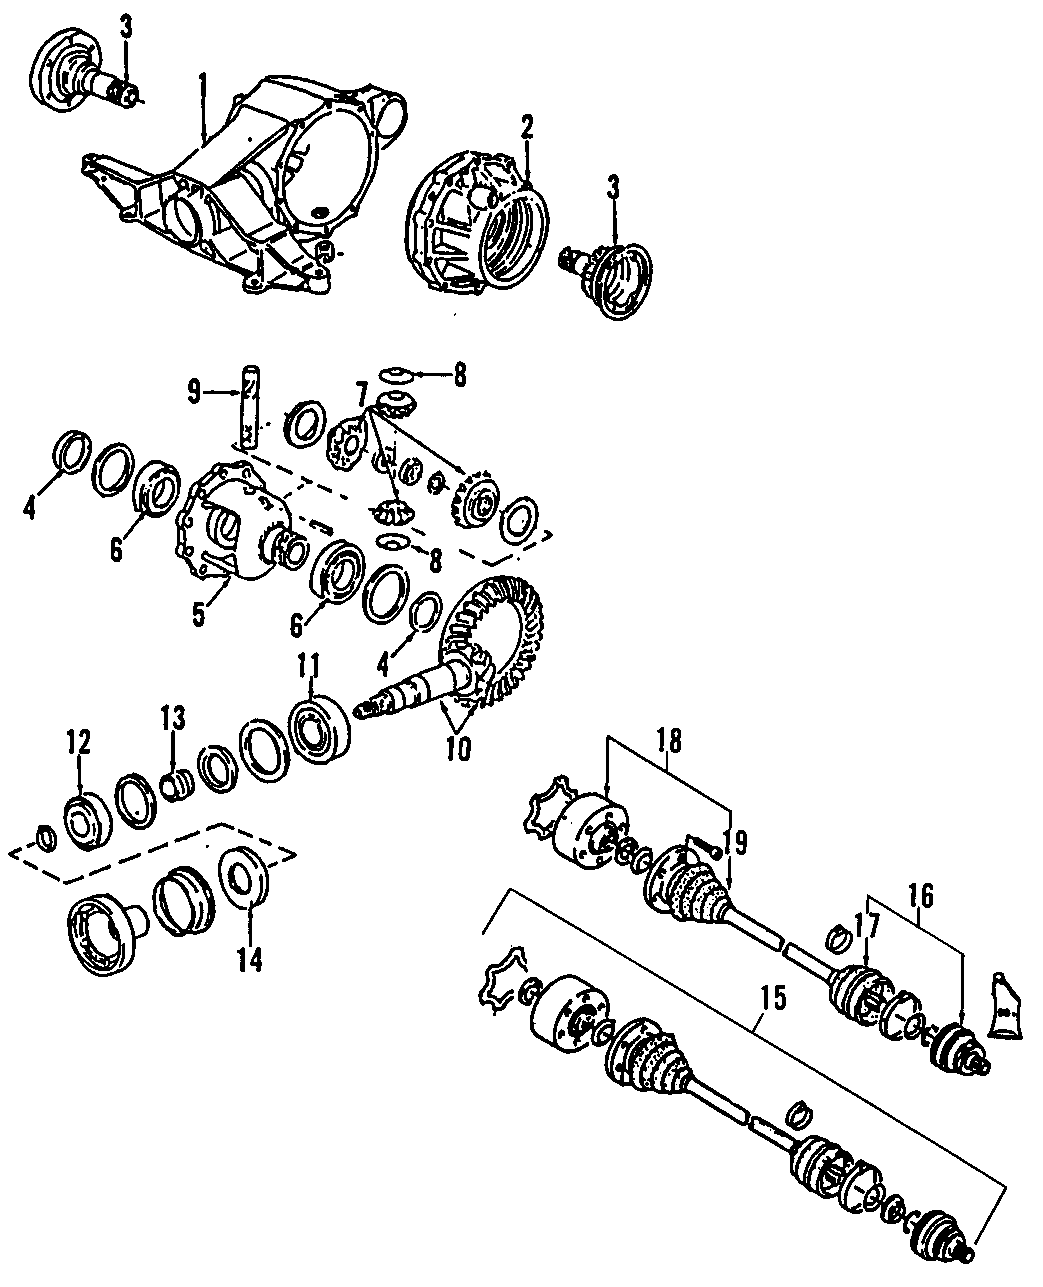 17DRIVE AXLES. REAR AXLE. AXLE SHAFTS & JOINTS. DIFFERENTIAL. PROPELLER SHAFT.https://images.simplepart.com/images/parts/motor/fullsize/E255240.png